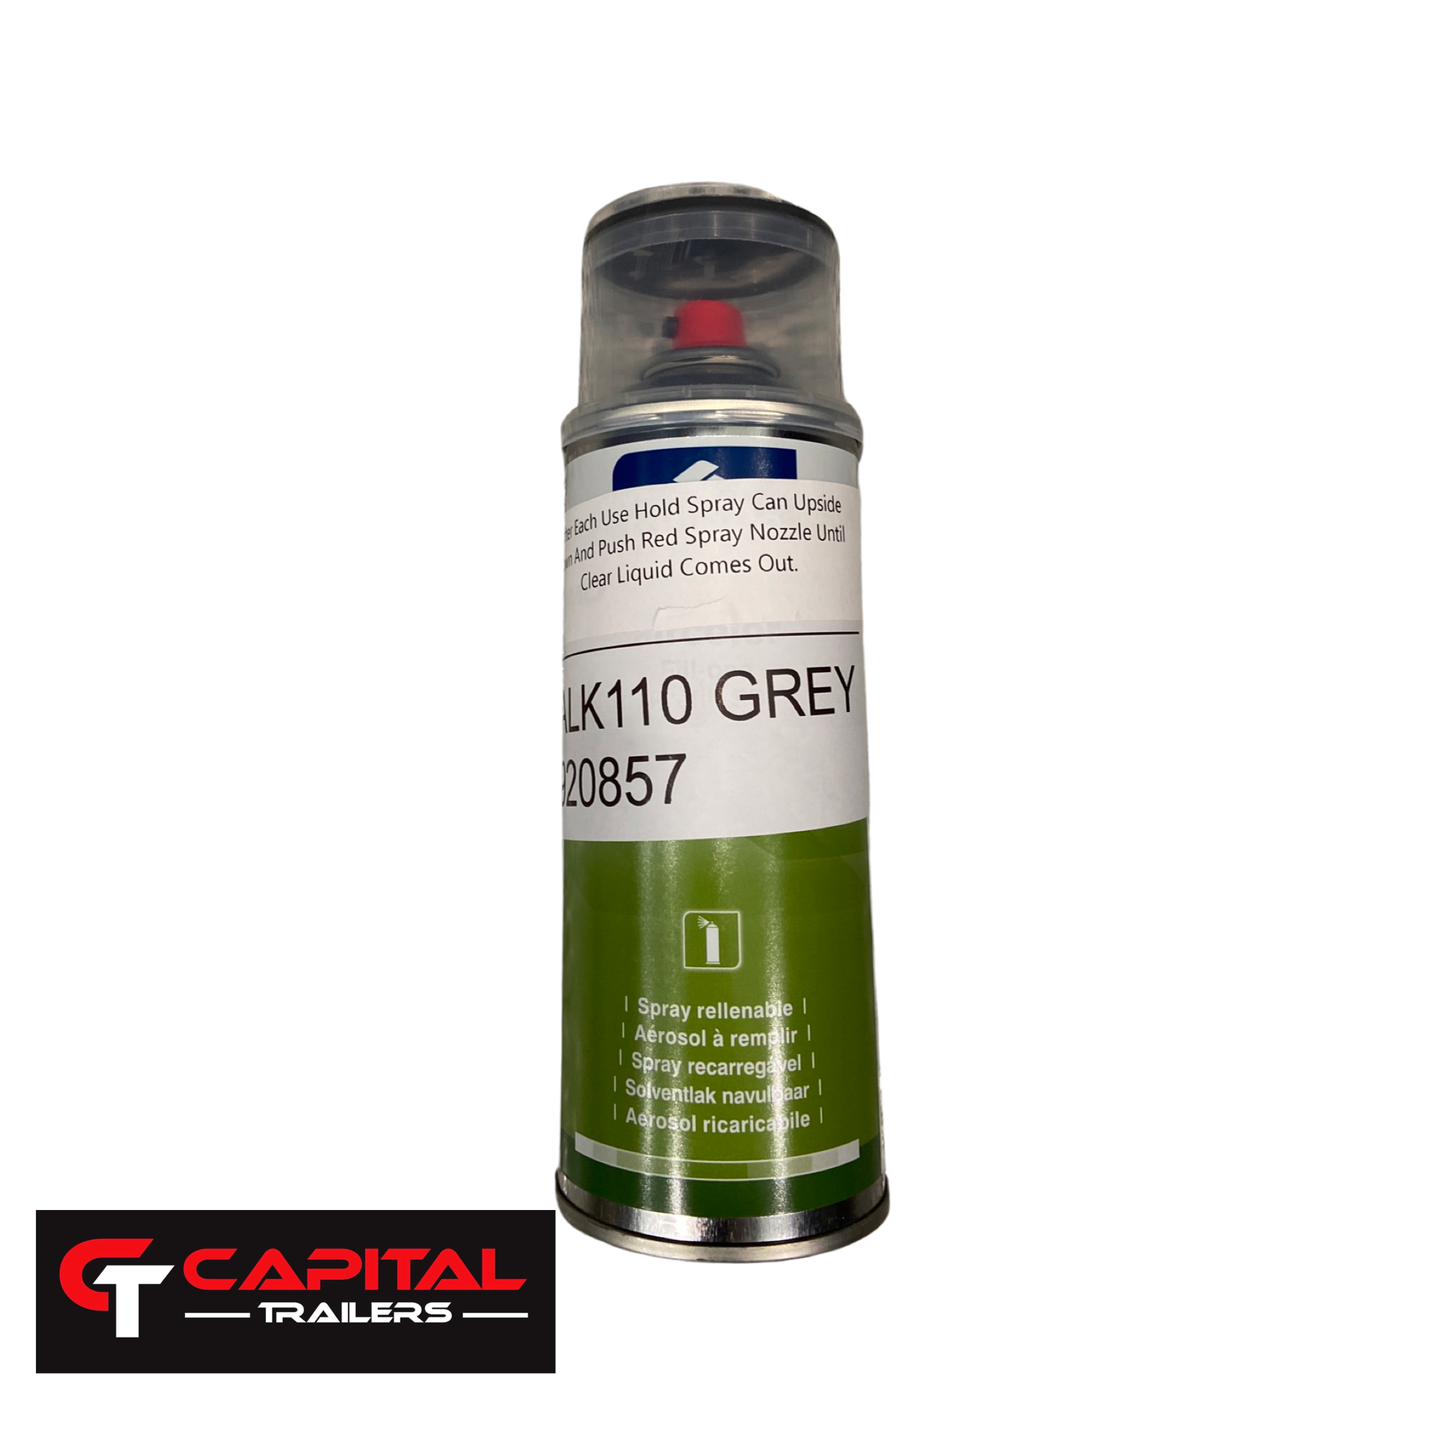 Charcoal Grey Spray Paint #920857